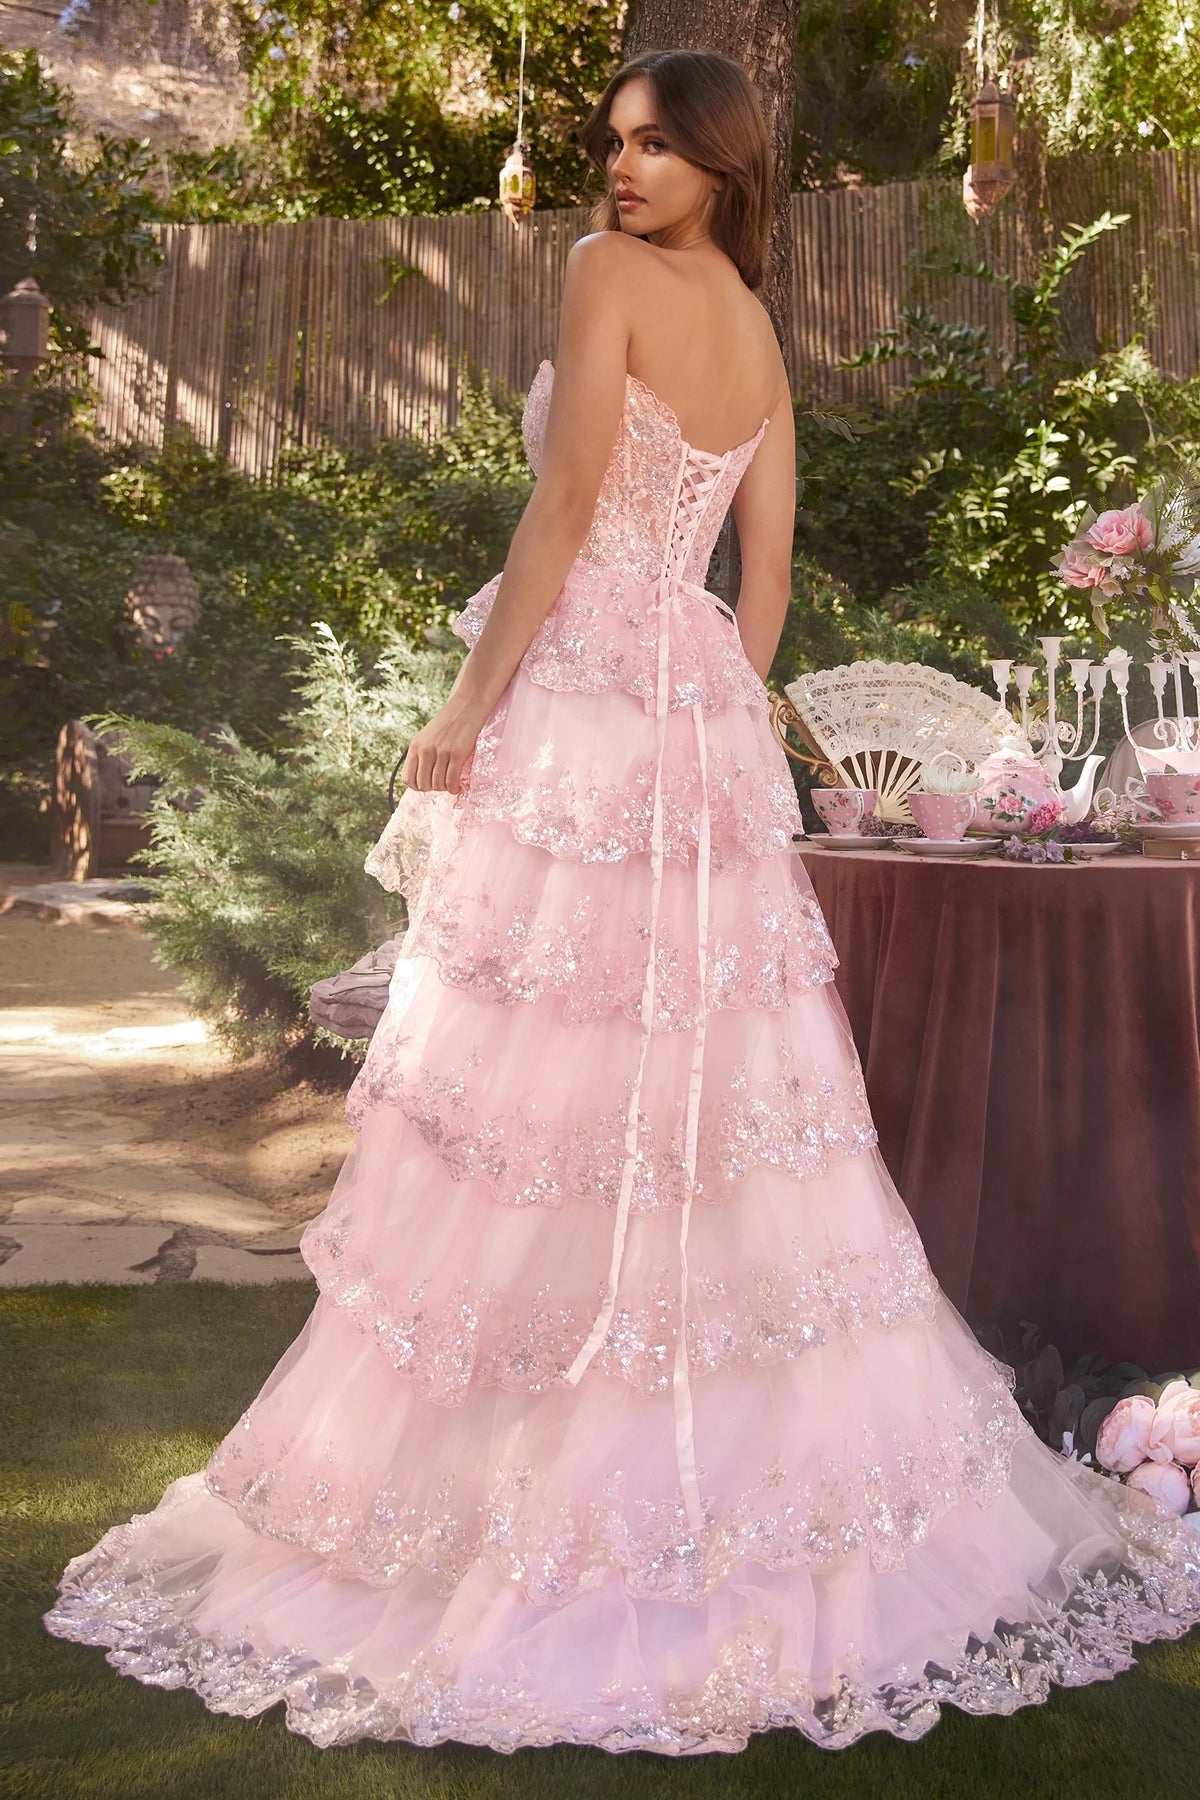 Andrea&Leo A1305 - A sparkling strapless A-line gown with tiered, layered skirt, sparkling scalloped lace hems, sheer boned bodice adorned with glistening sequins, and a lace-up corset back for a captivating look at prom.  The model is wearing the dress in pink.